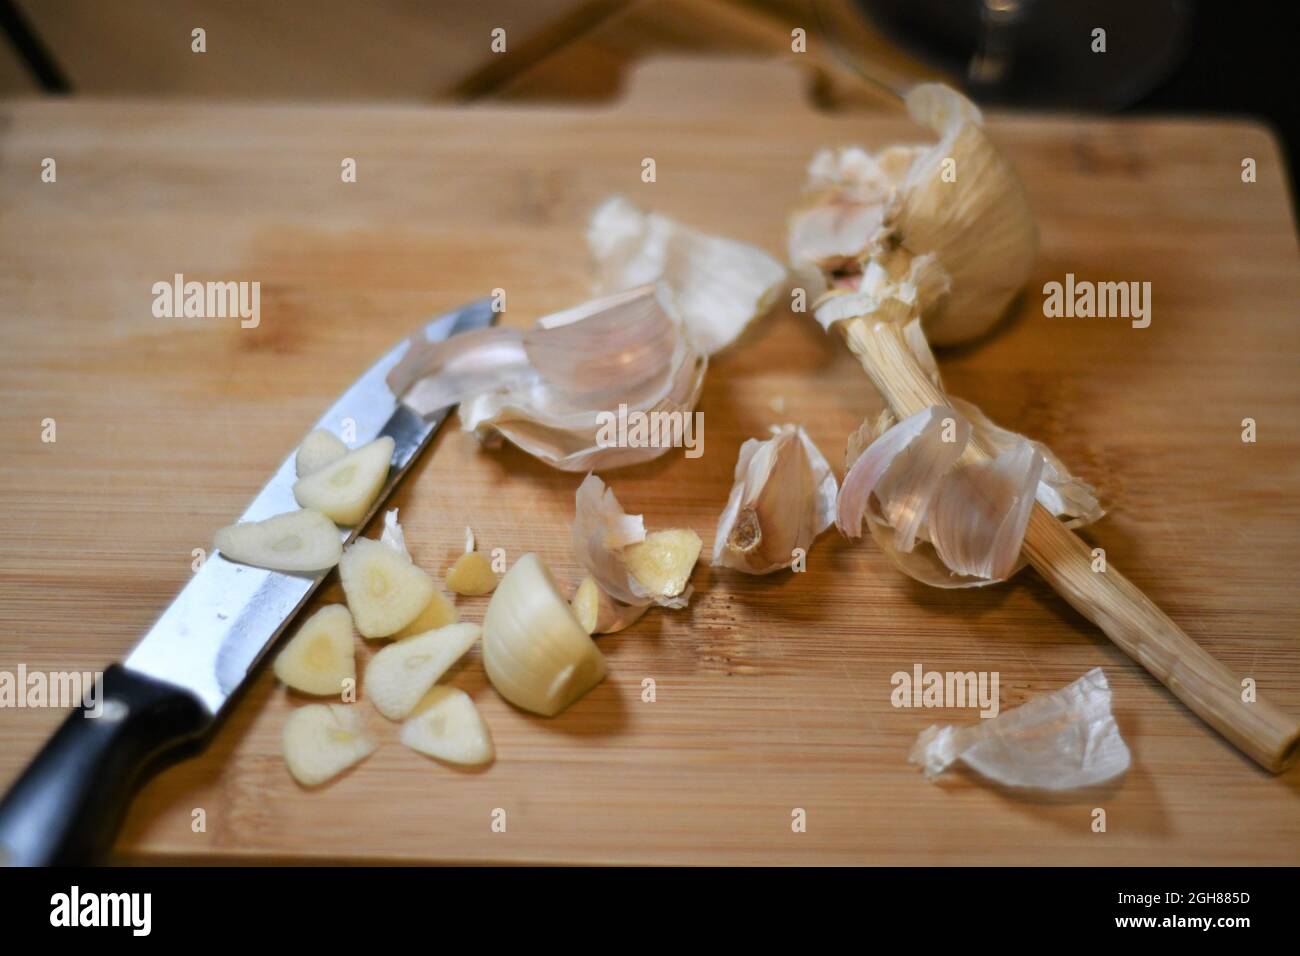 Freshly cut garlic cloves, allium sativum, as they have been extracted from the bulb, sliced on a wooden bread board in a domestic kitchen Stock Photo